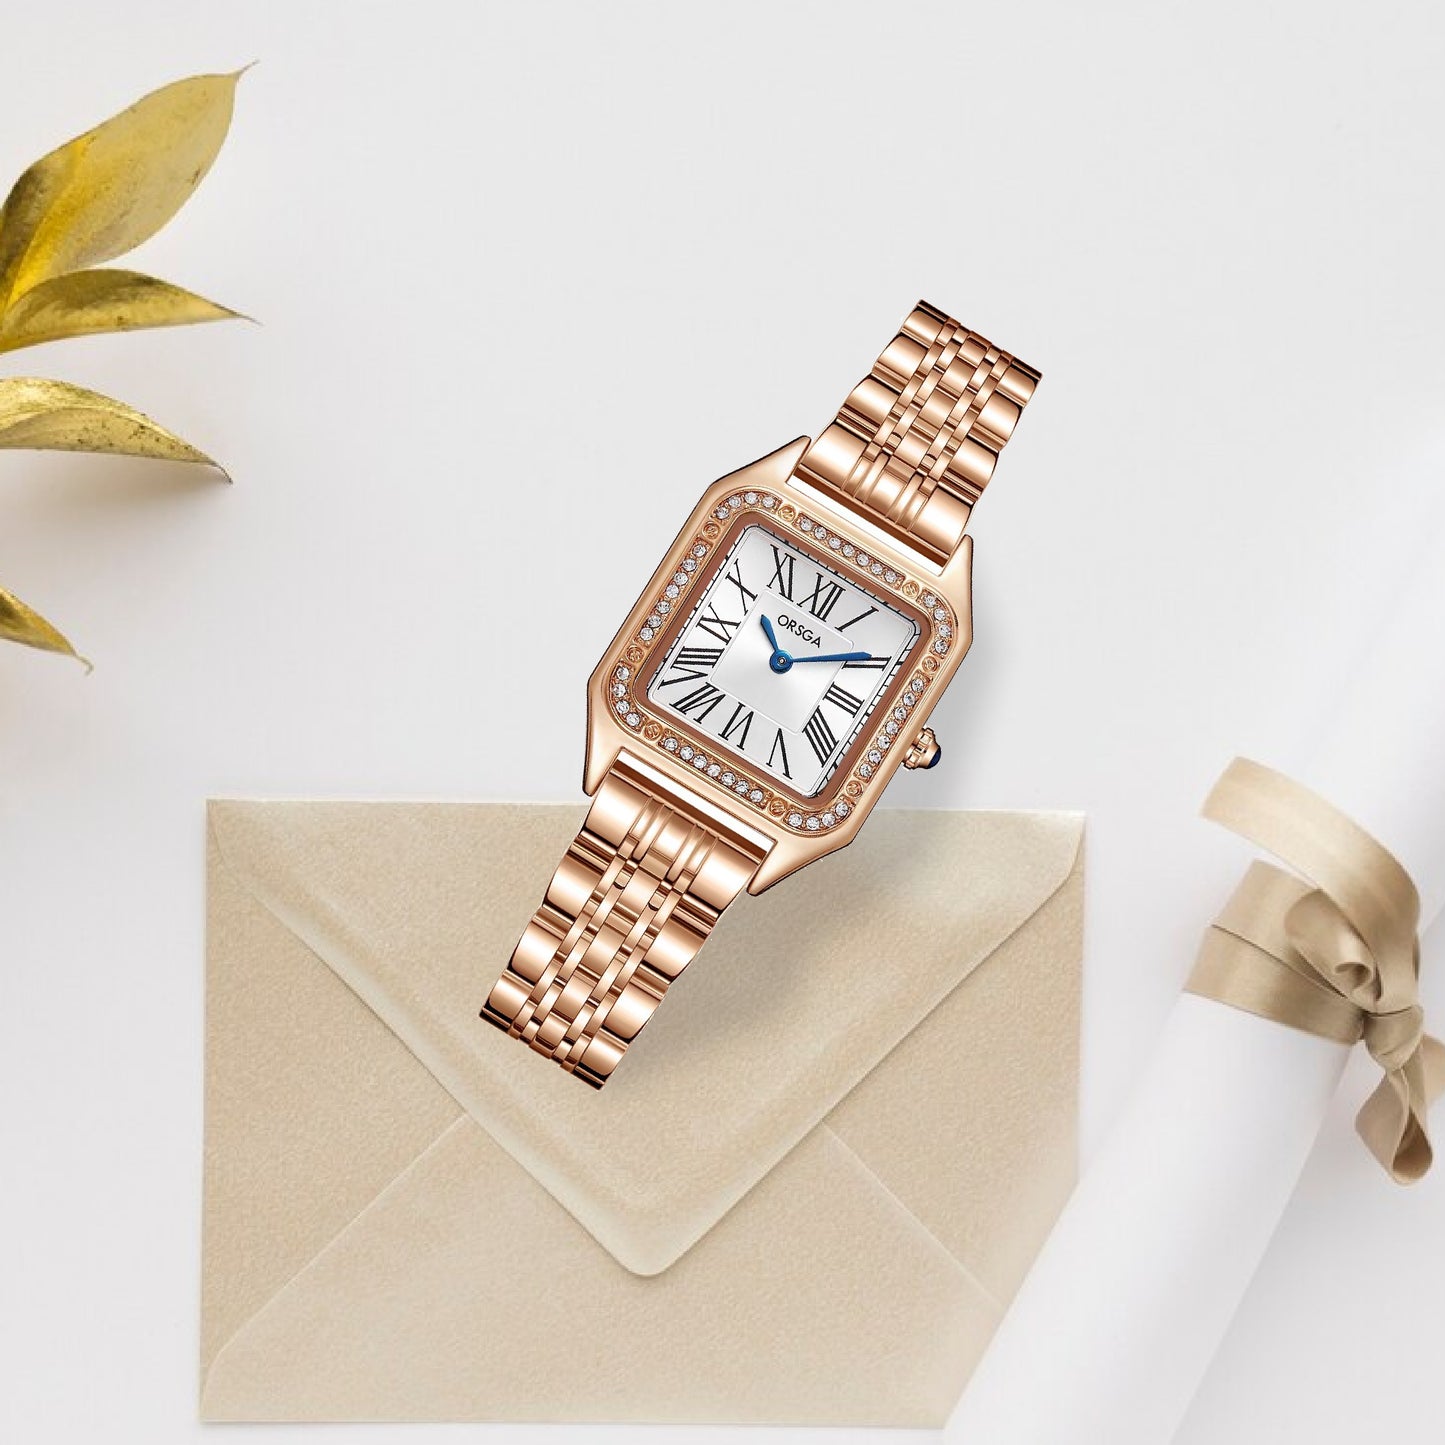 CADENCE Women Watch -  White Dial Rose Gold